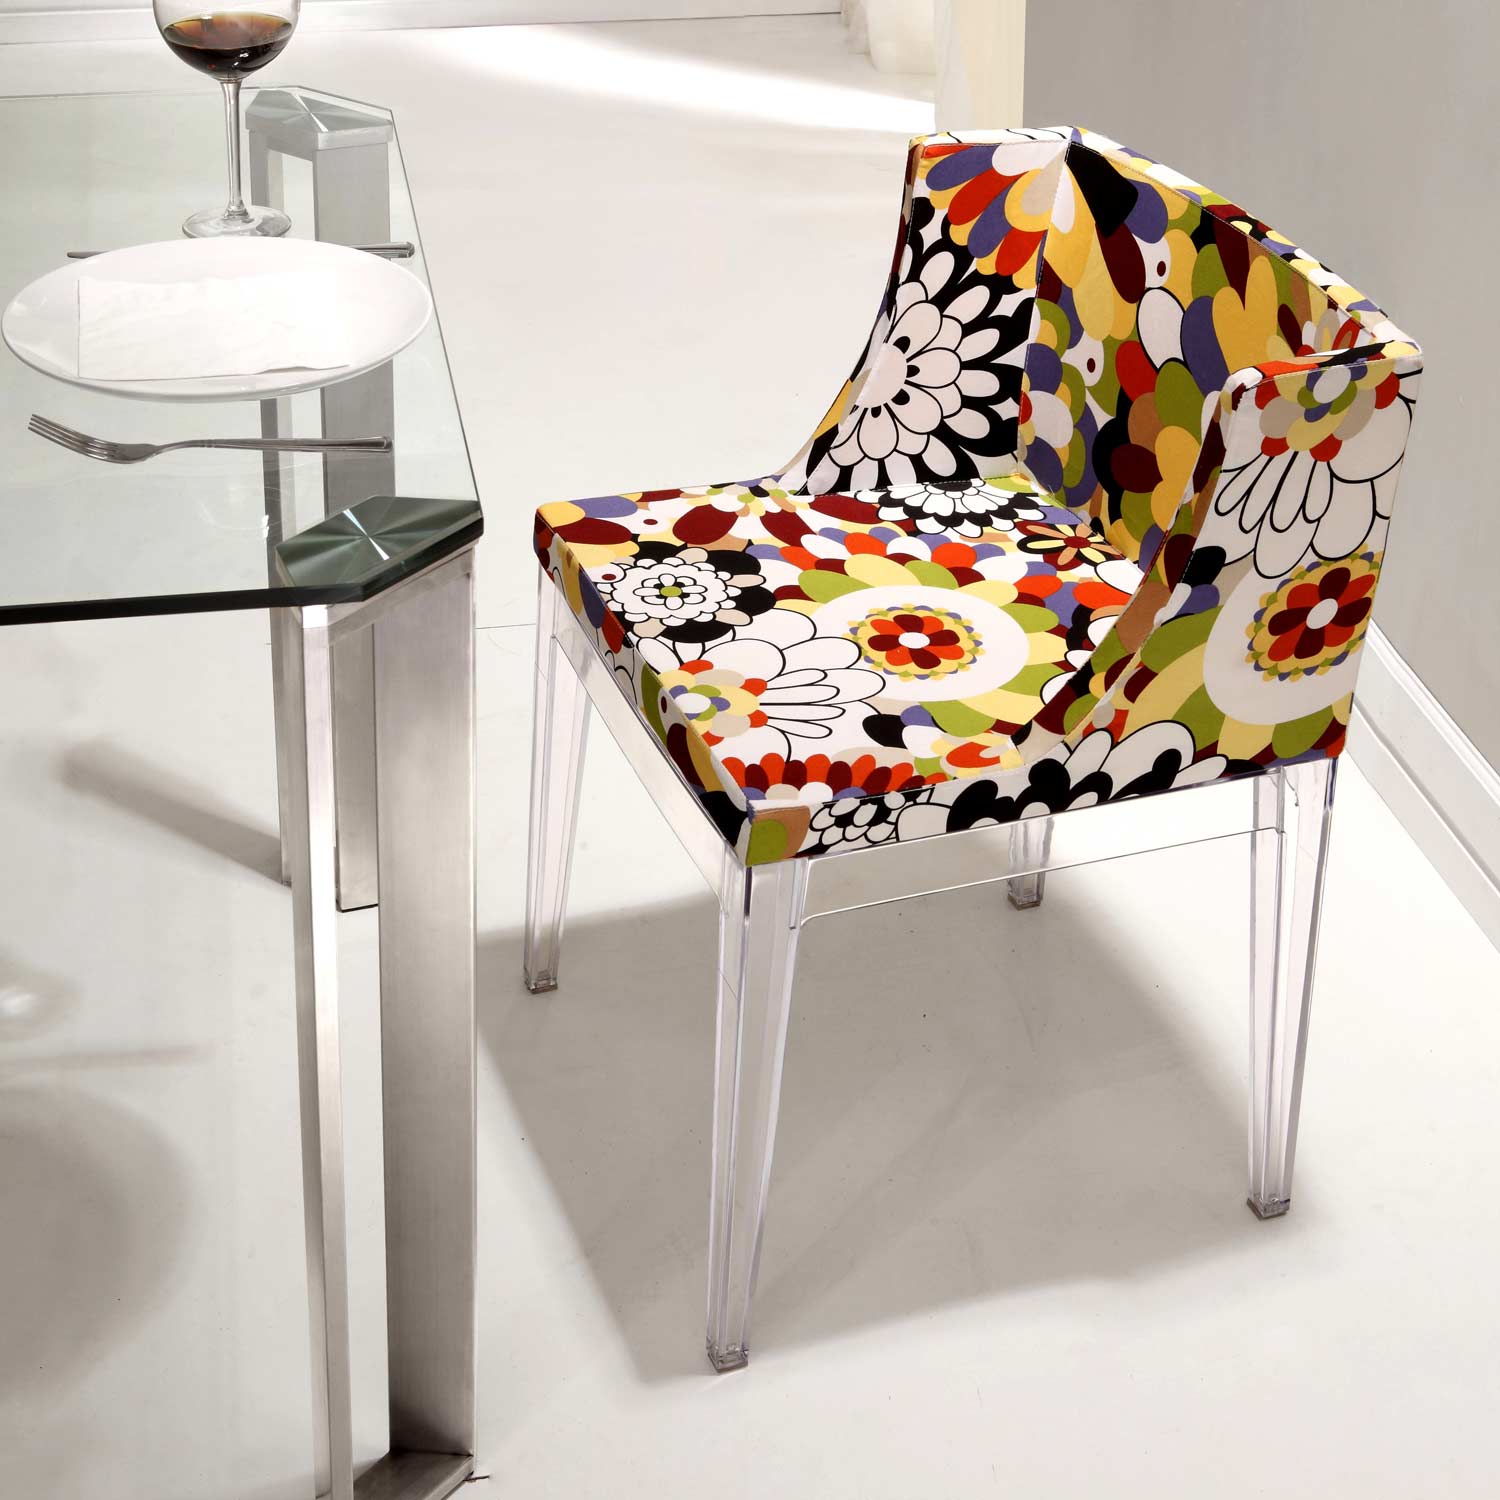 Pizzaro dining chair is a floral piece with acrylic legs and frame and is inspired by 1960s